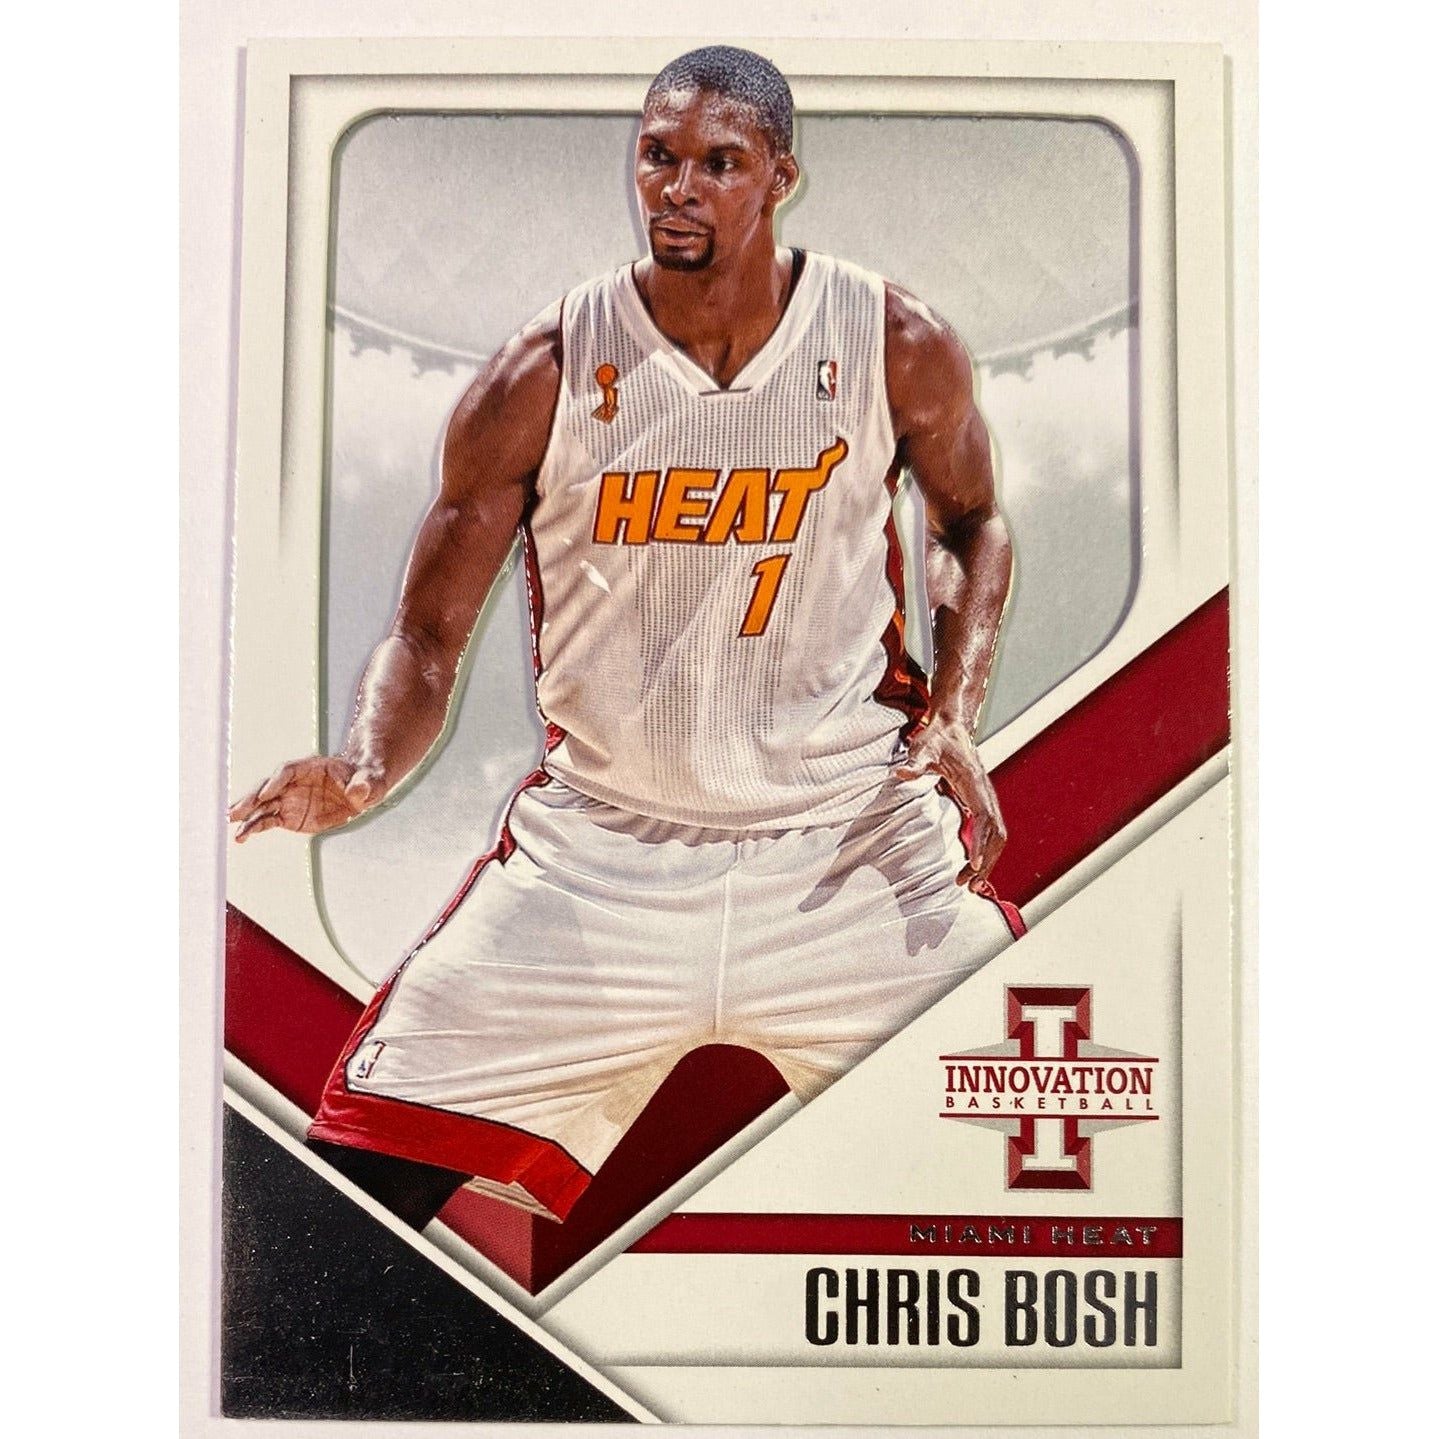  2013-14 Innovation Chris Bosh Clear Cut /199  Local Legends Cards & Collectibles